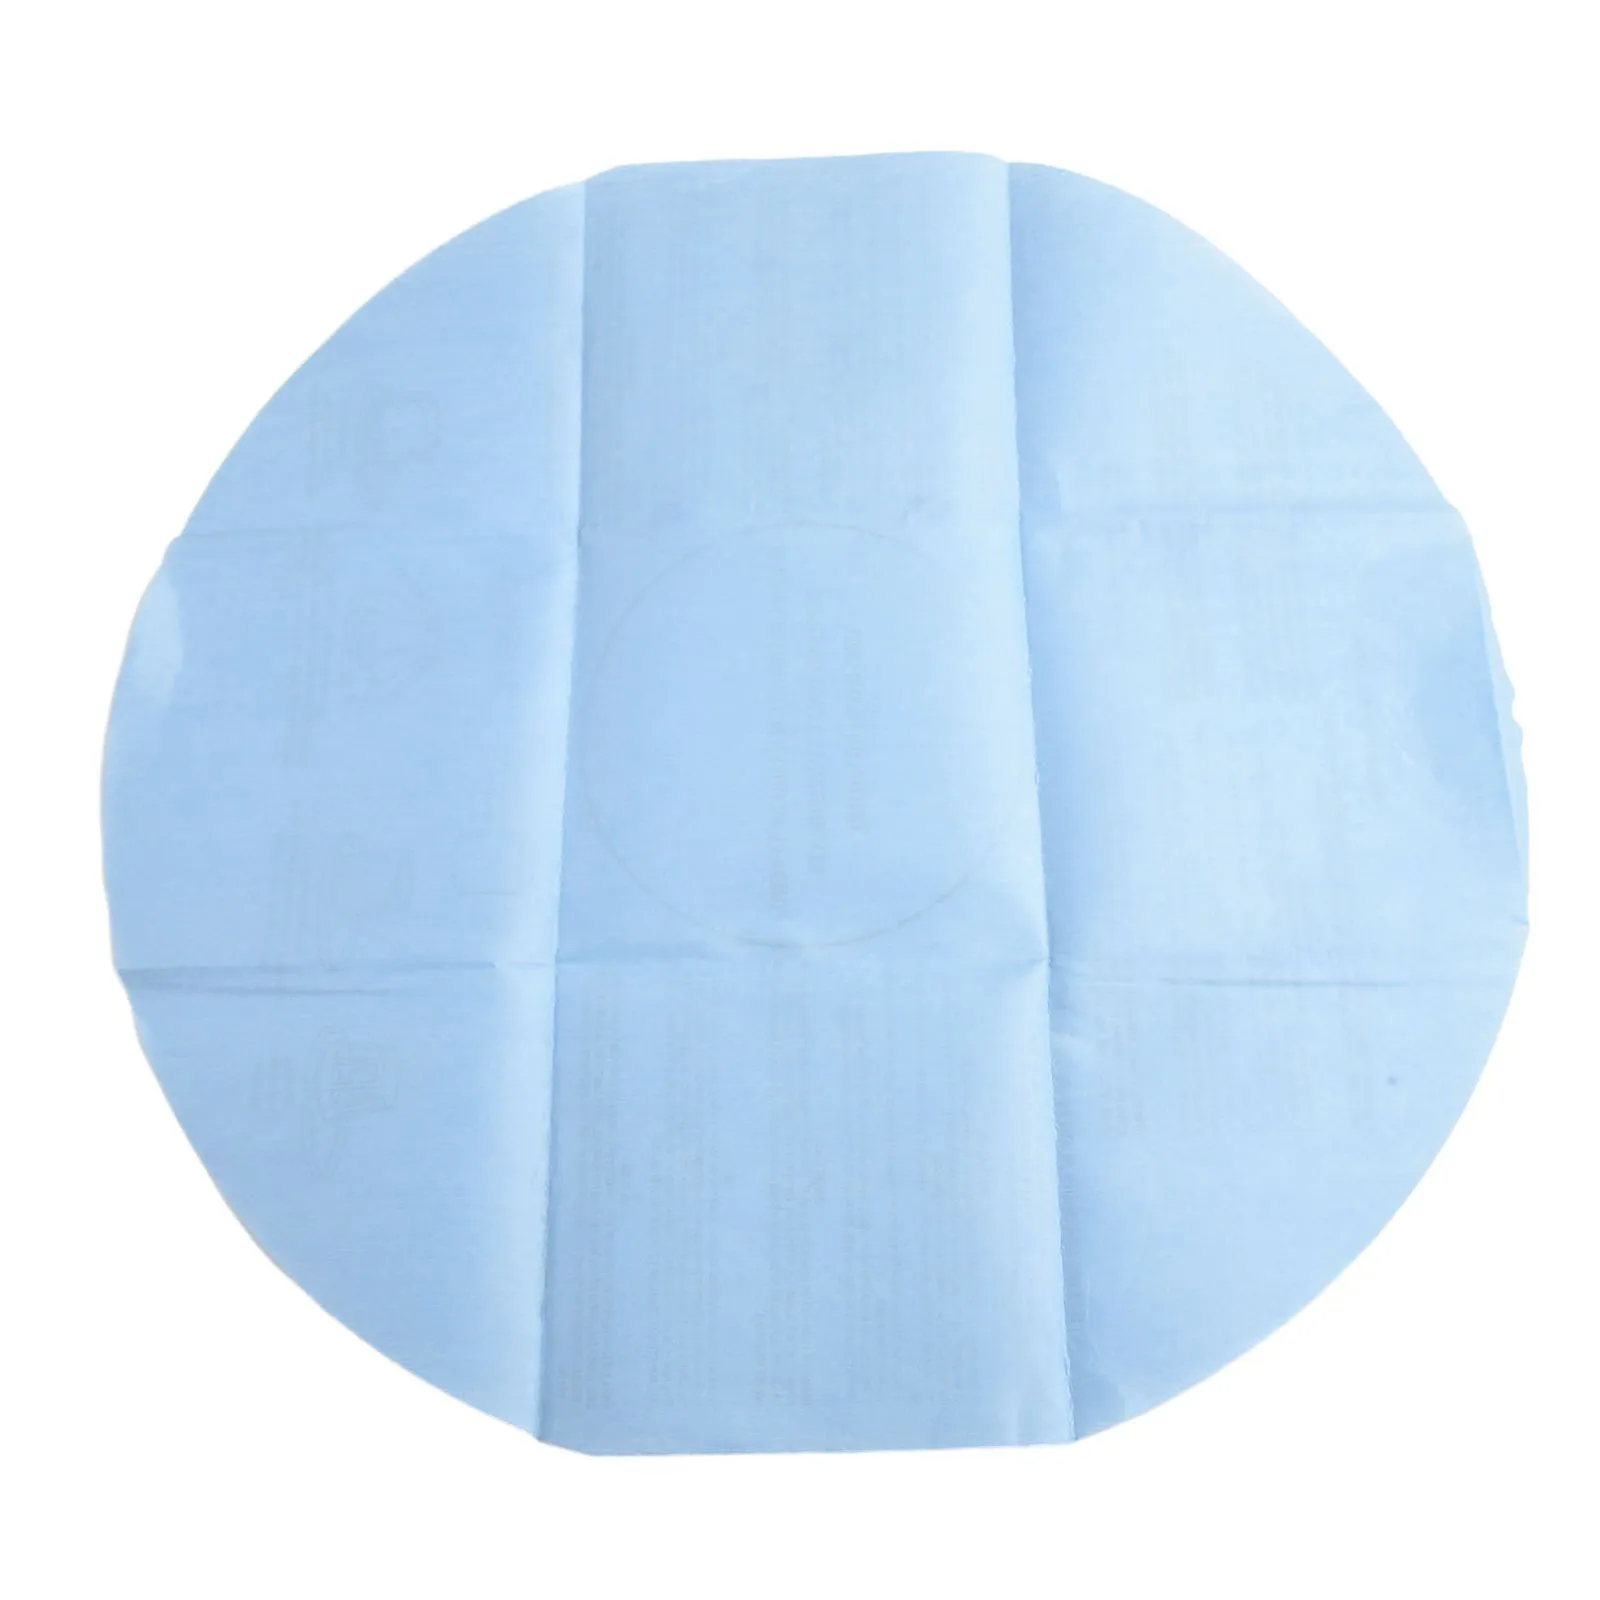 

Filter Filter Bags Retainer Ring Cleaning Tools Accessories For Shop Vac Wet/Dry High Quality Household Sweeper Parts